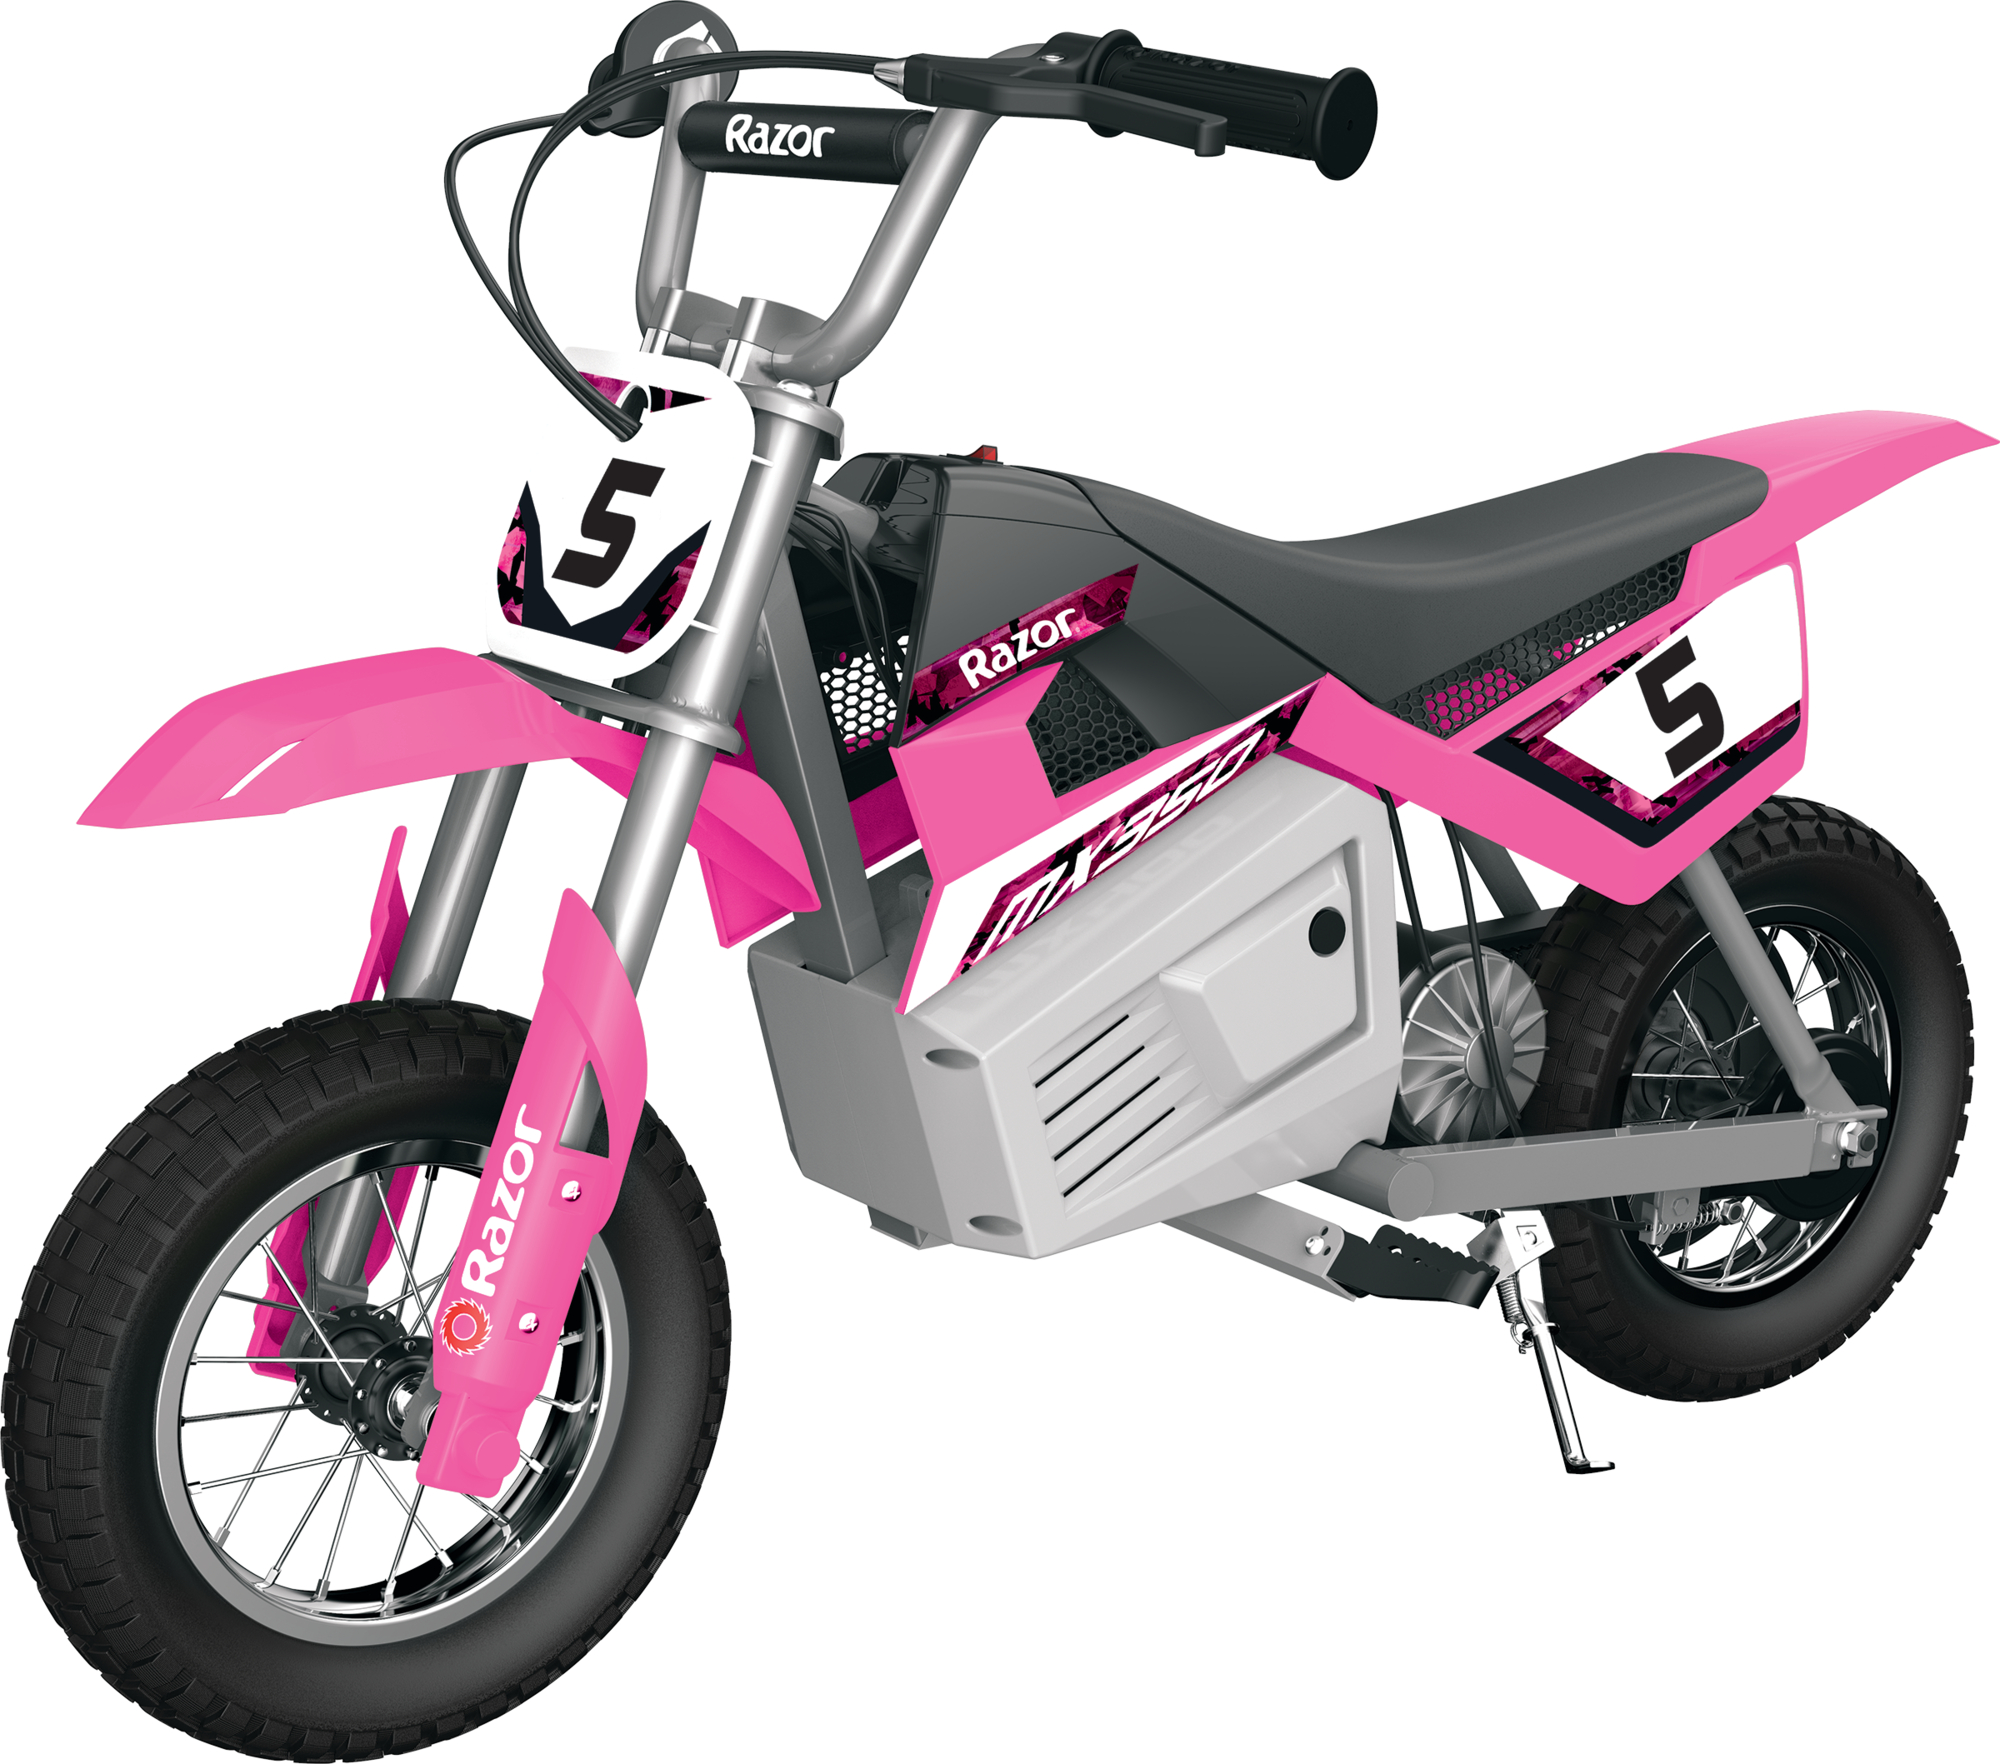 Razor Dirt Rocket MX350 - Pink, up to 14 mph, 24V Electric-Powered Dirt Bike for Kids 13+ - image 1 of 10